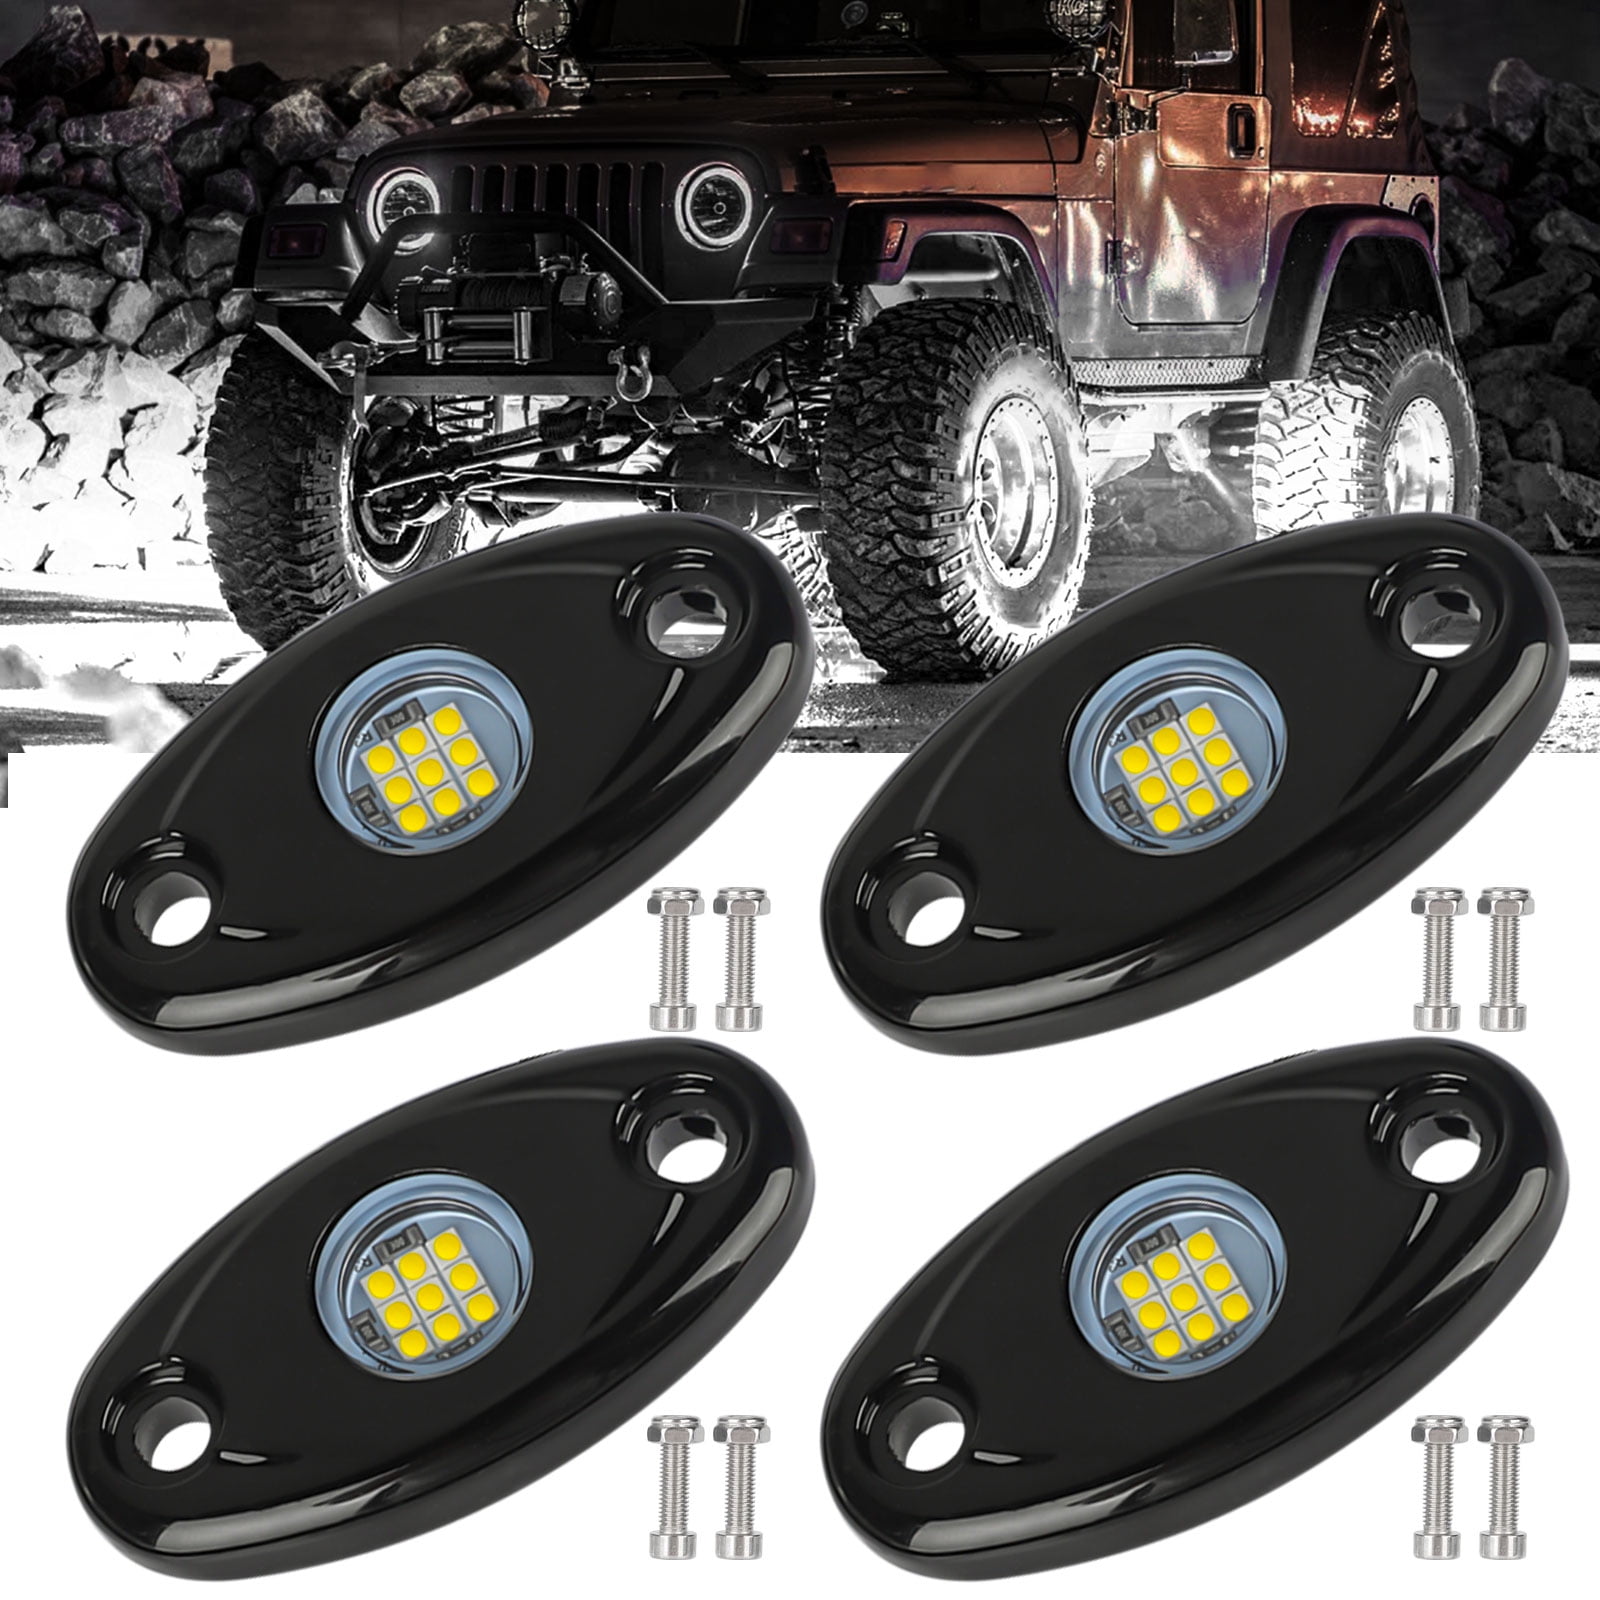 4PCS White LEDMIRCY LED Rock Lights White Kit for JEEP Off Road Truck Auto Car Boat ATV SUV Waterproof High Power Underbody Neon Trail Rig Lights Underglow Lights Interior Exterior Shockproof 